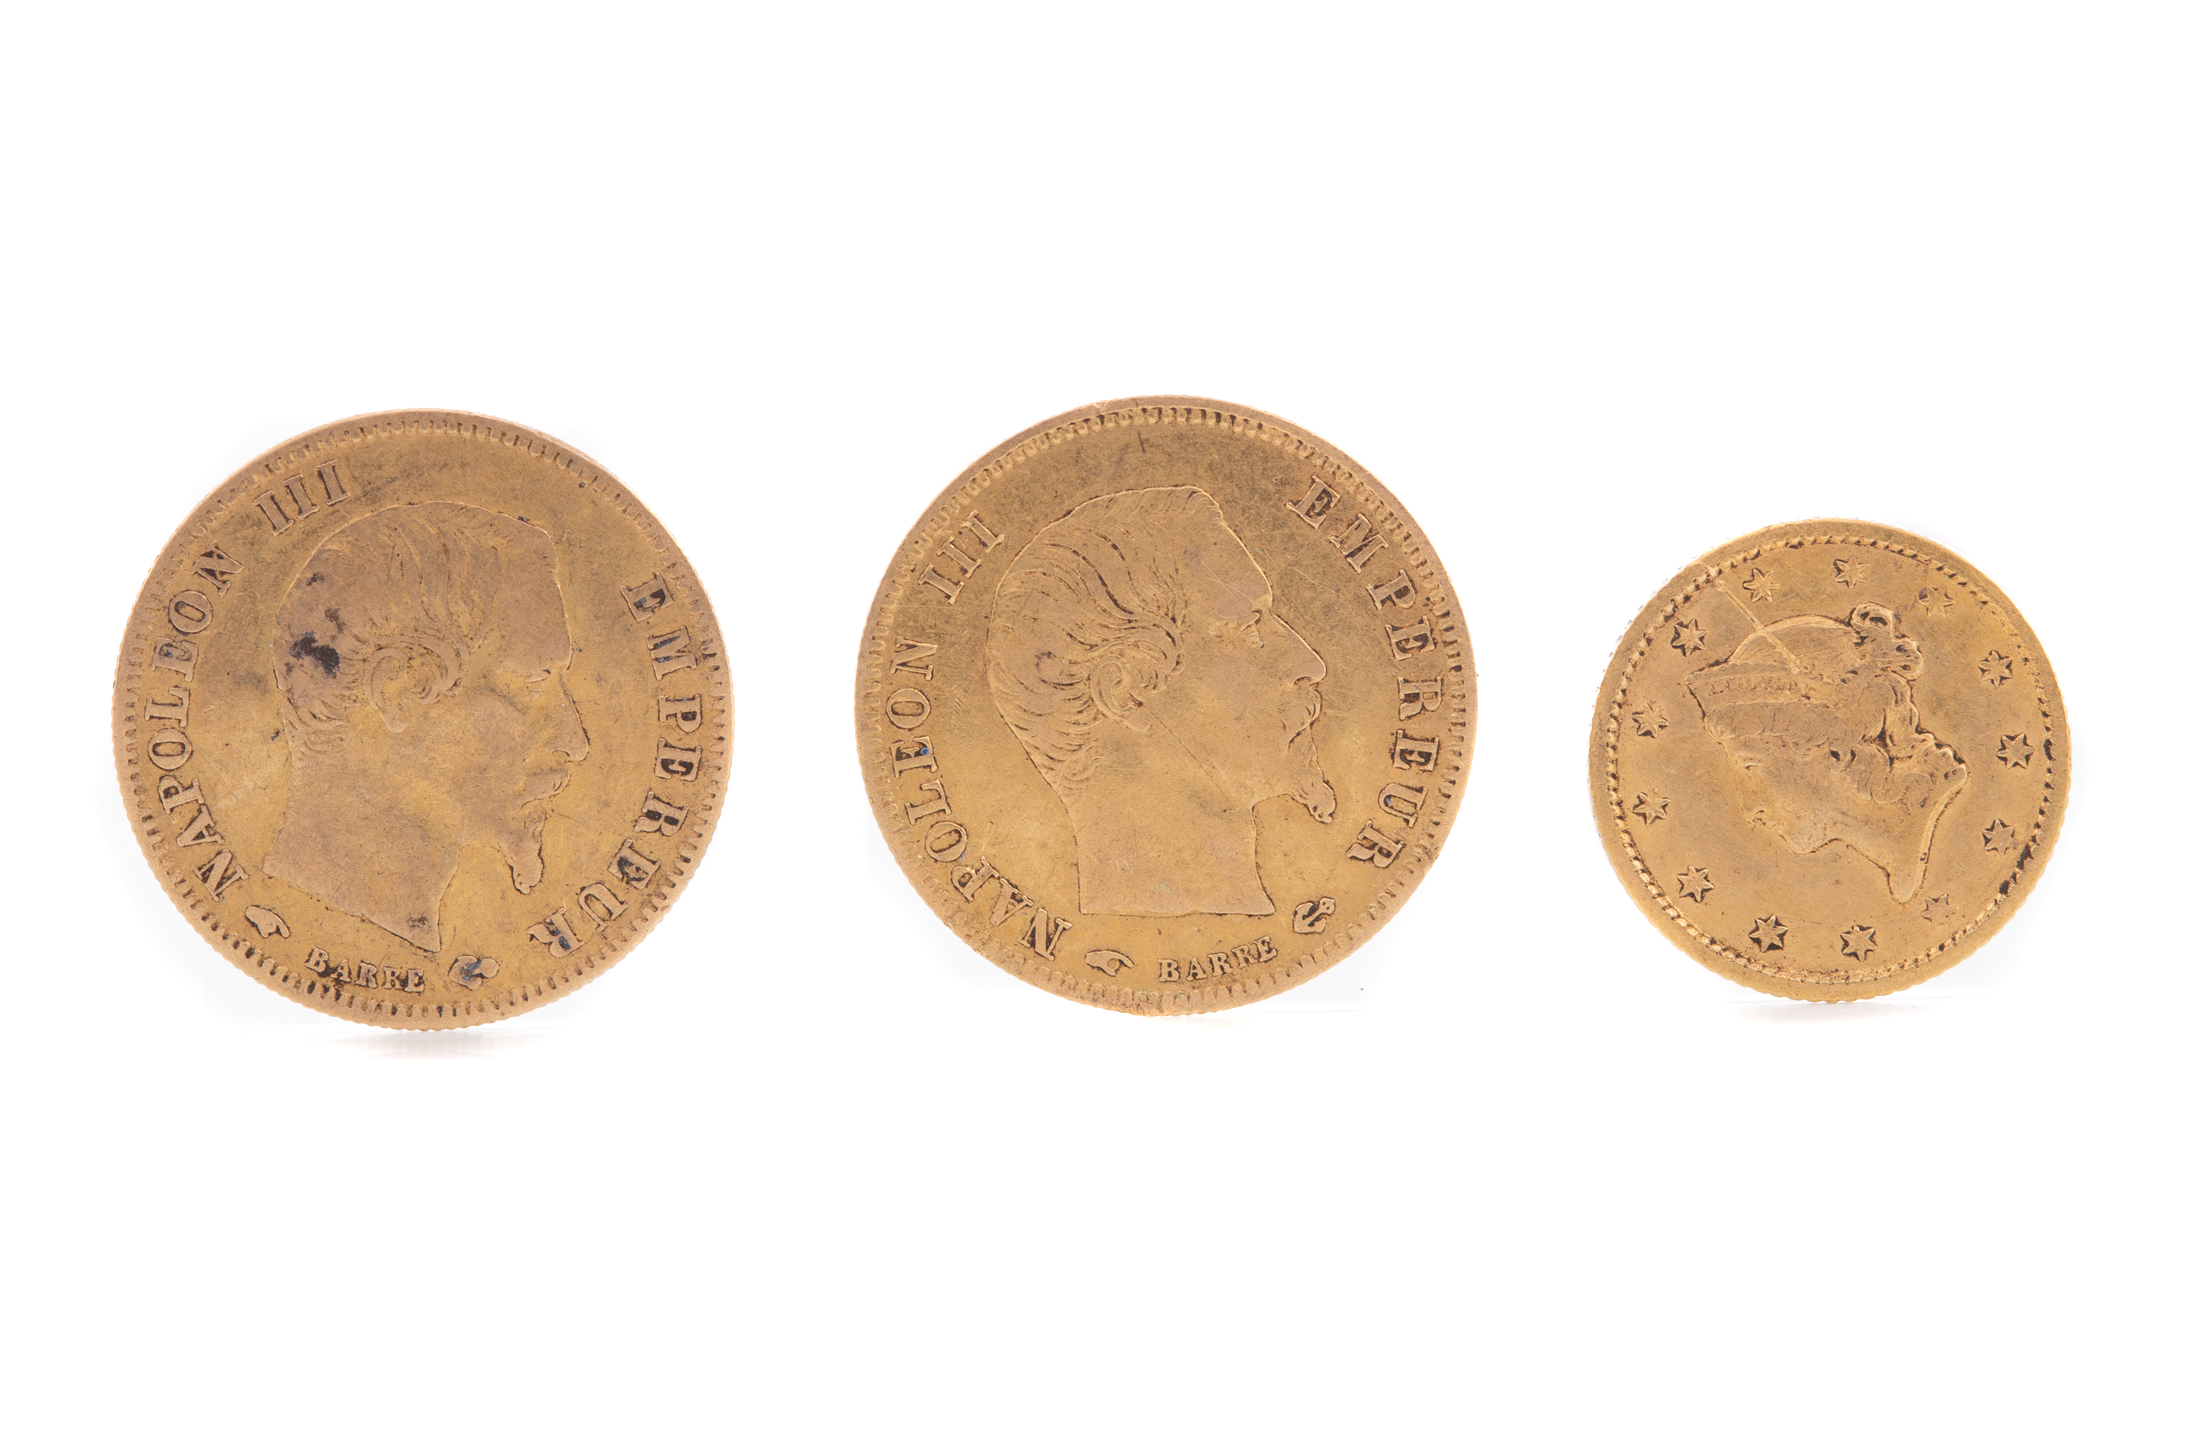 TWO NAPOLEON III FIVE FRANC COINS AND A GOLD ONE DOLLAR